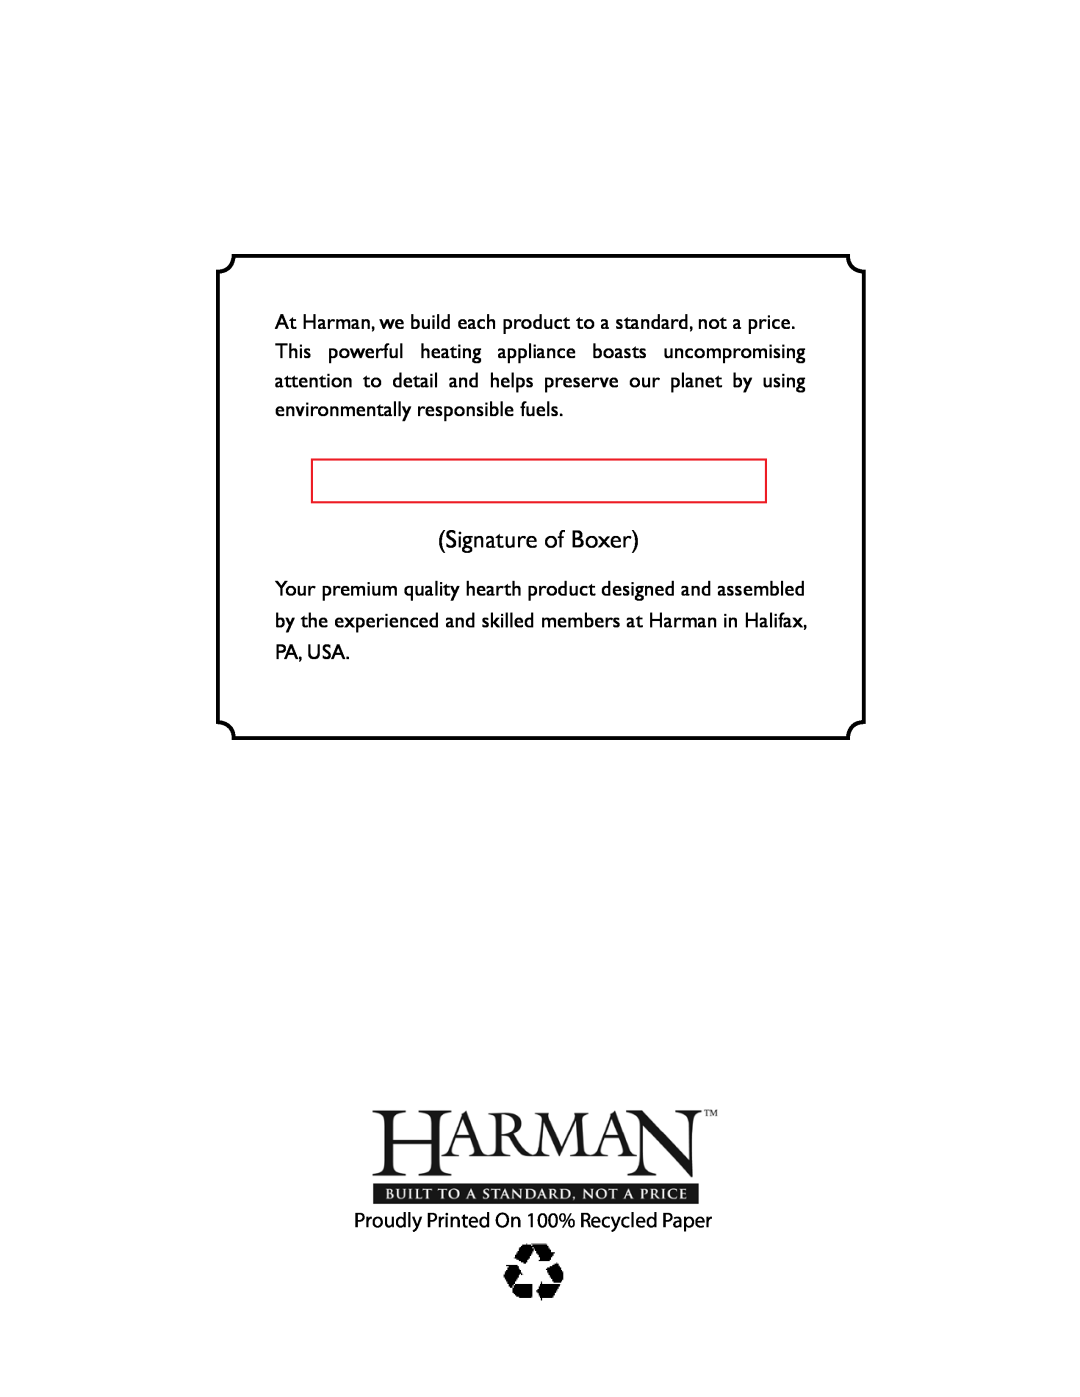 Harman Stove Company R16 manual Signature of Boxer, Proudly Printed On 100% Recycled Paper 